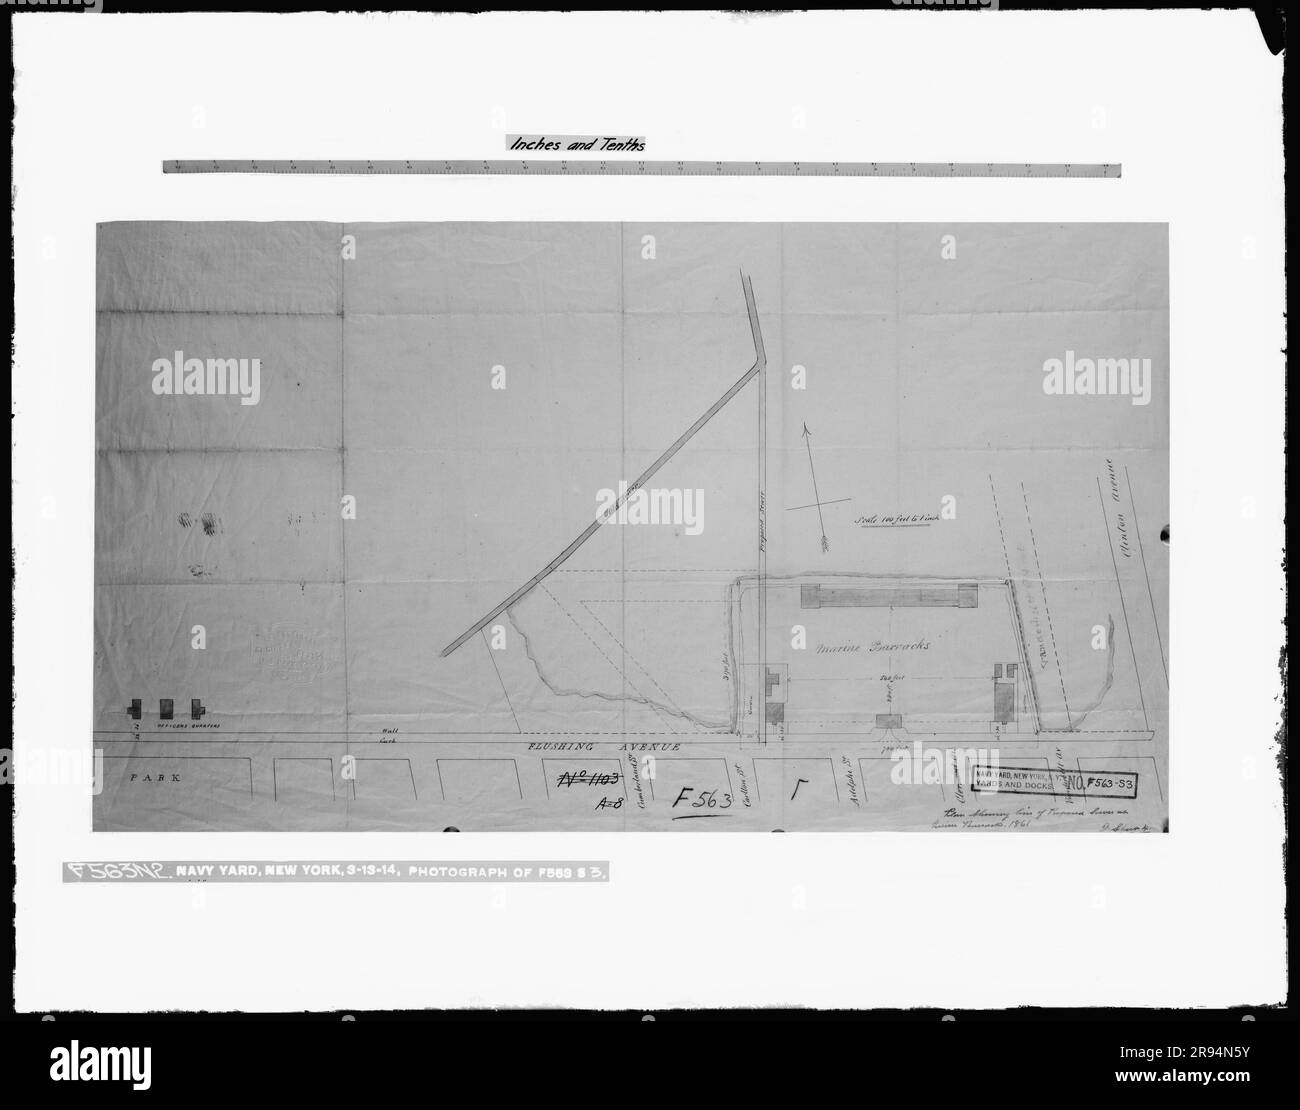 Photo of Drawing F563-S3 - Plan Showing Line of Proposed Sewer at Marine Barracks, 1861. Glass Plate Negatives of the Construction and Repair of Buildings, Facilities, and Vessels at the New York Navy Yard. Stock Photo